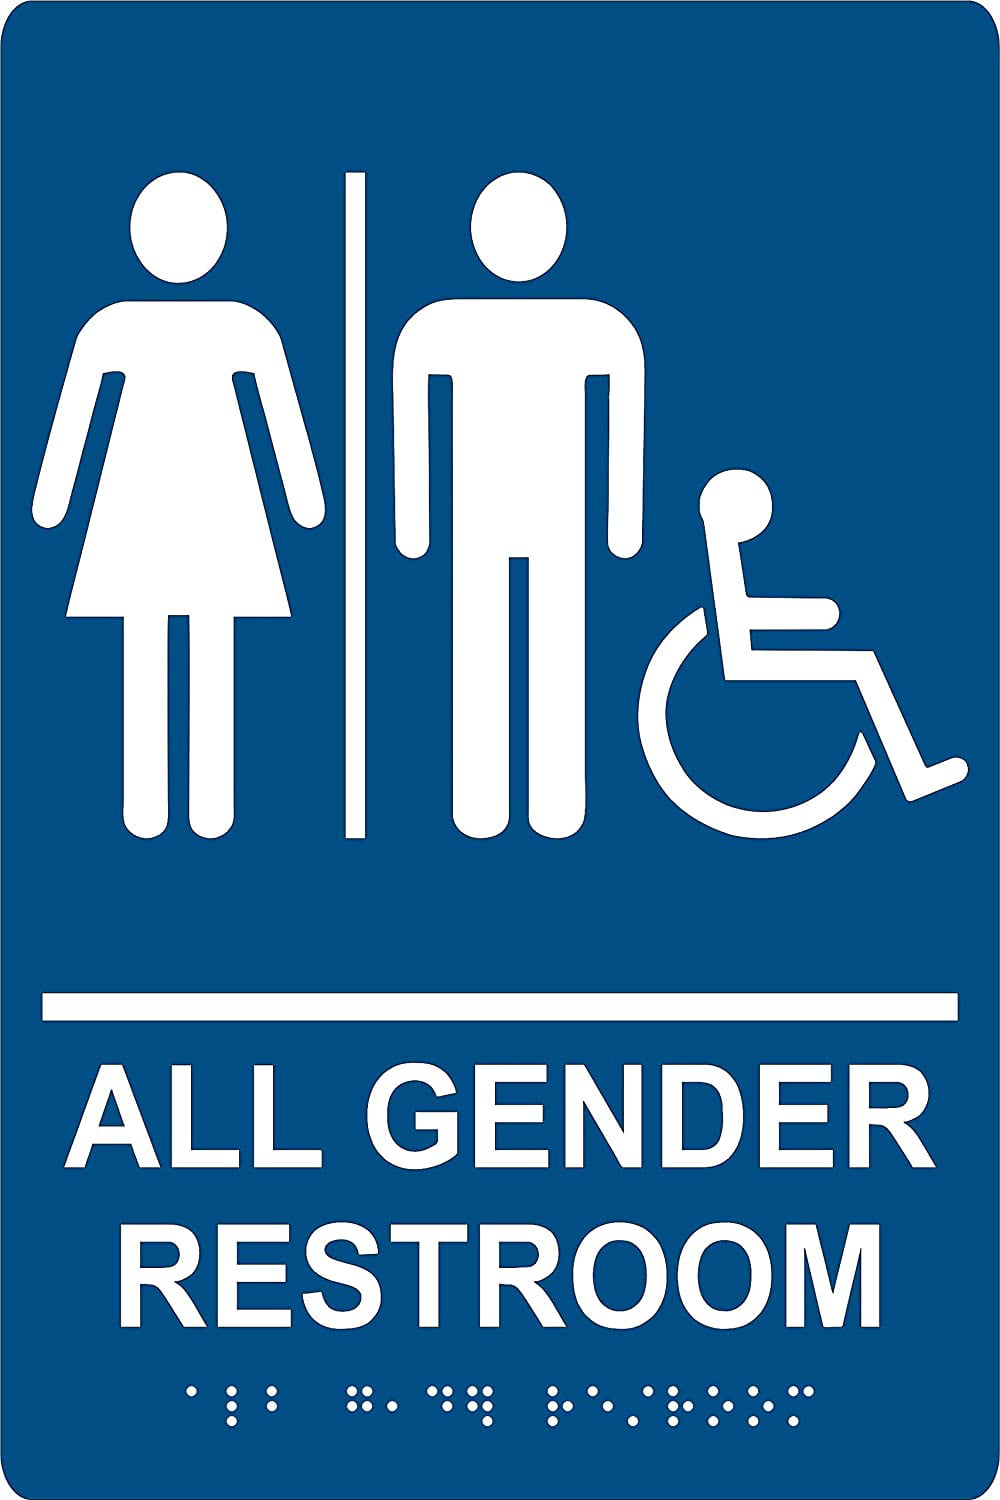 ADA Compliant All Gender Restroom Sign with Braille